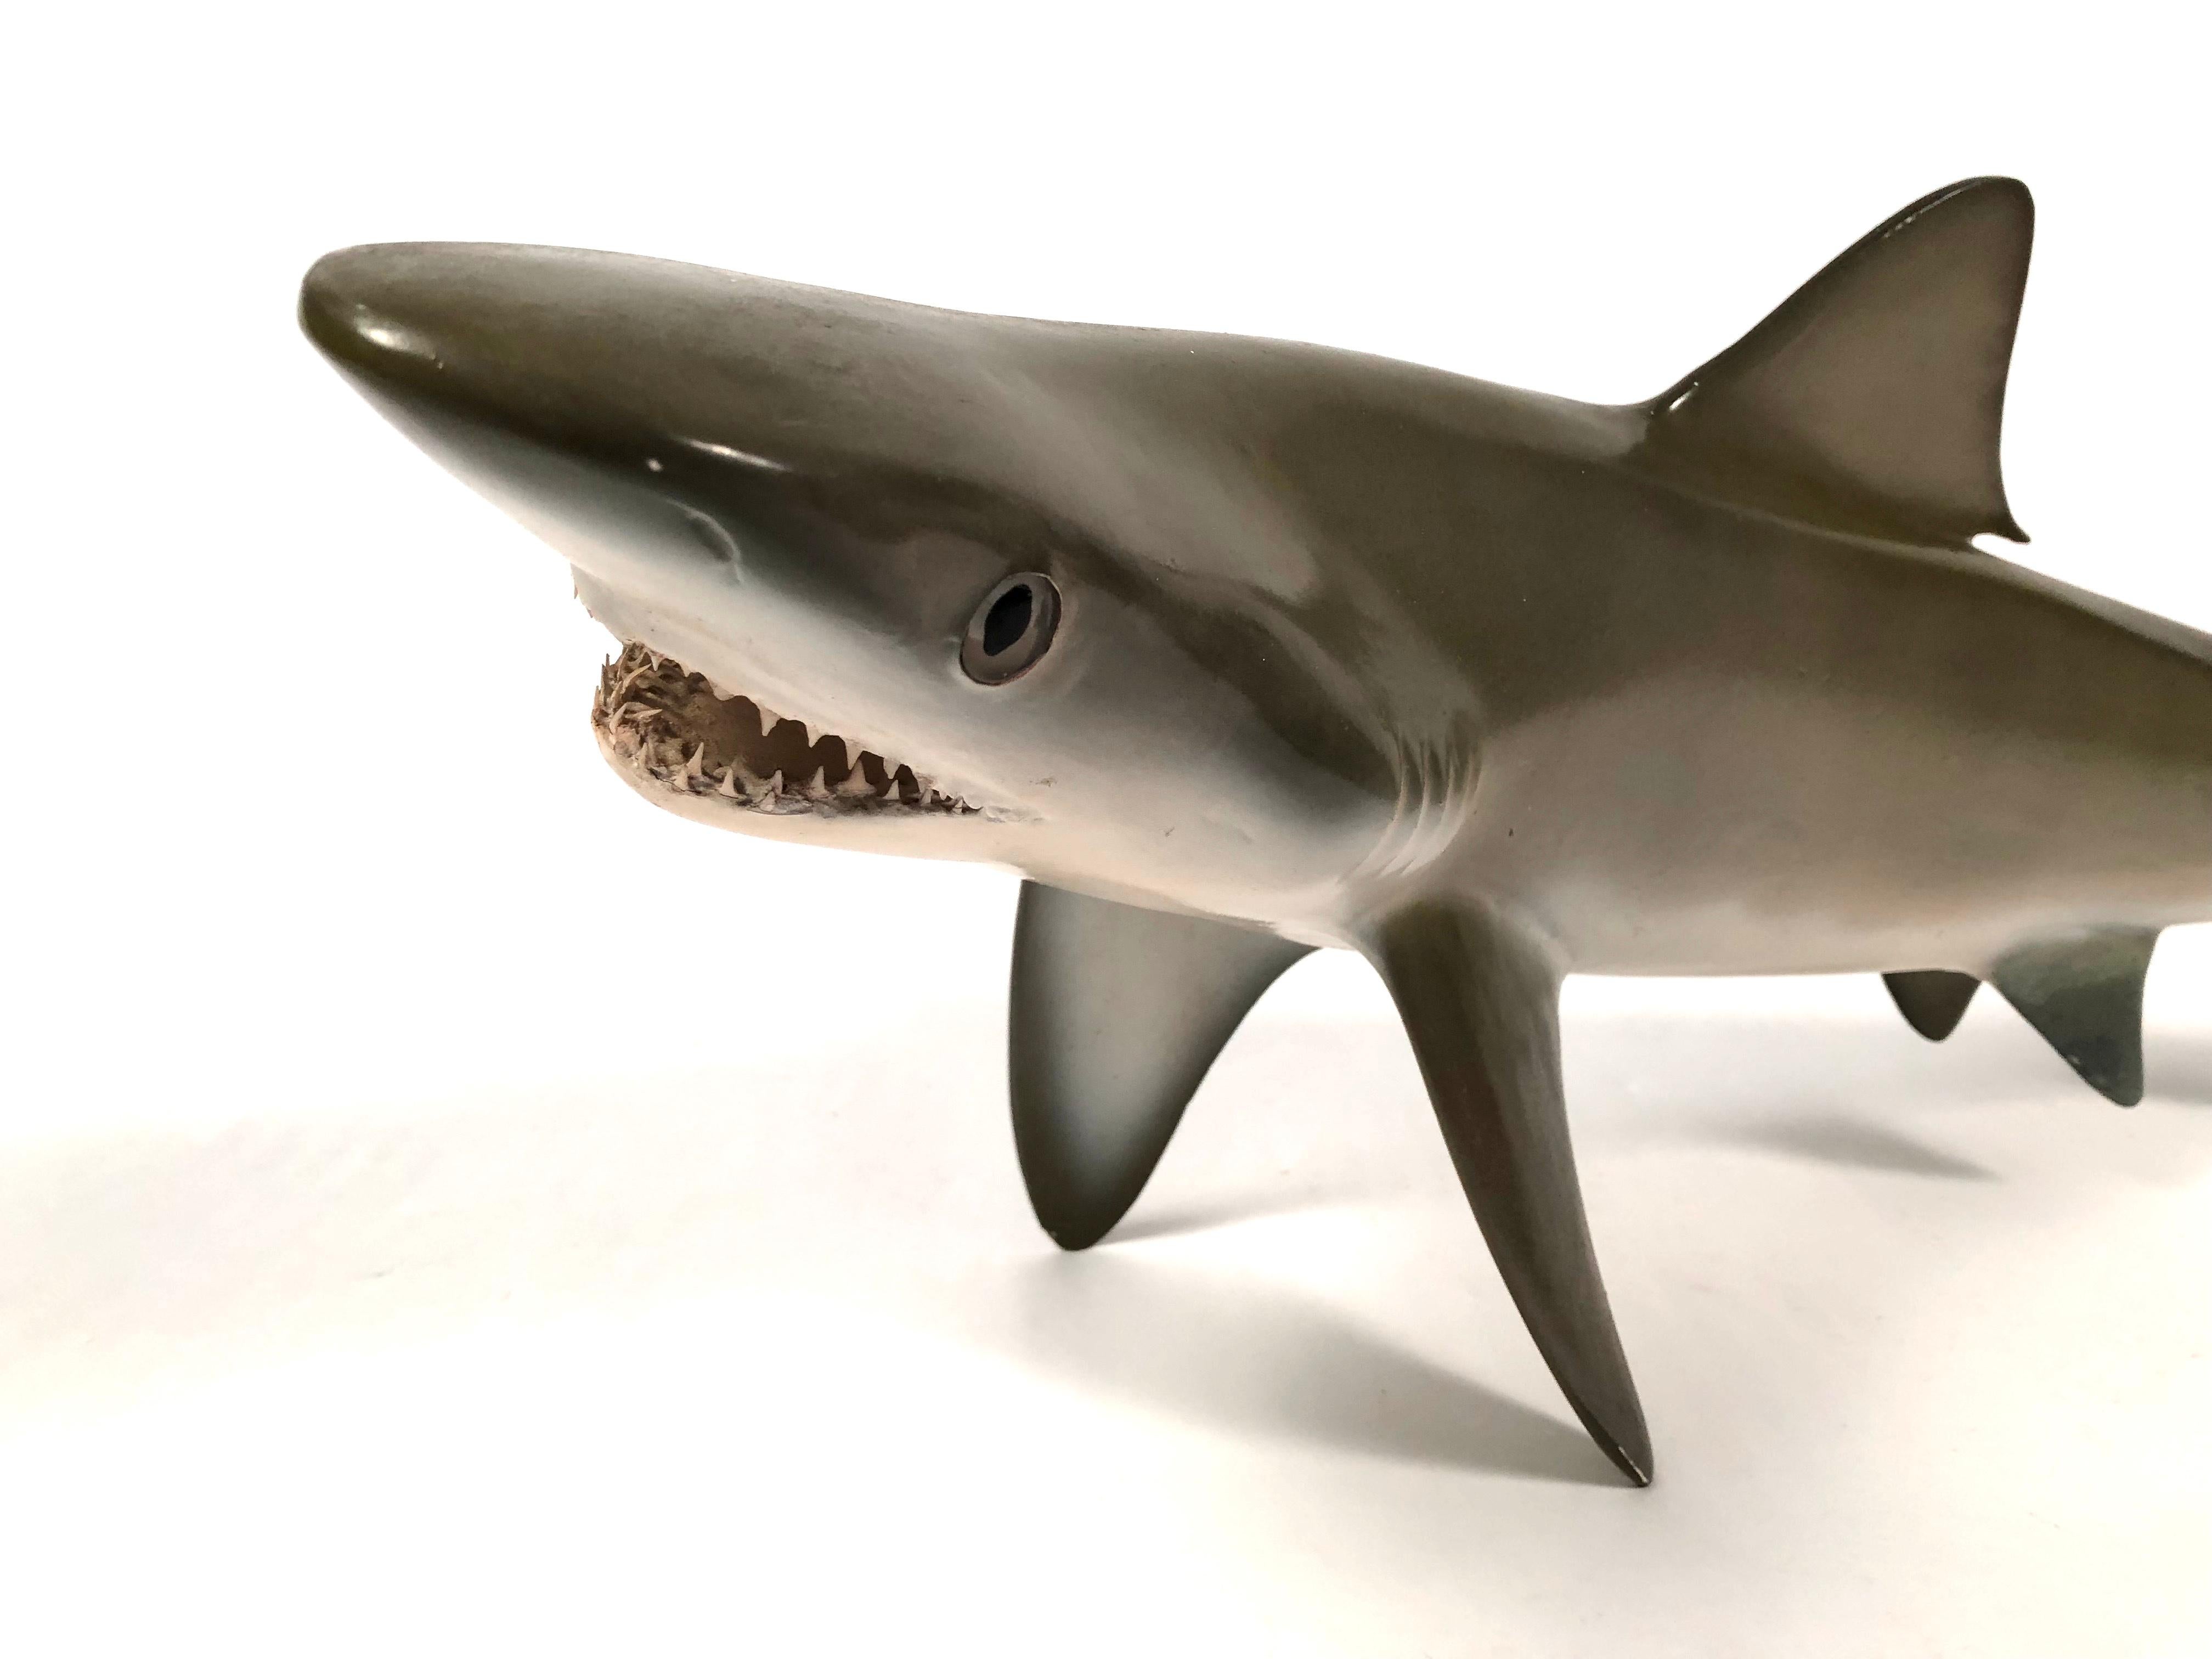 A vintage, realistic model of a sand tiger shark in painted wood with glass eyes and sharp teeth, which may be a wall-mounted sculpture with the bracket on its back or displayed on a table, likely from an aquarium or other display of marine